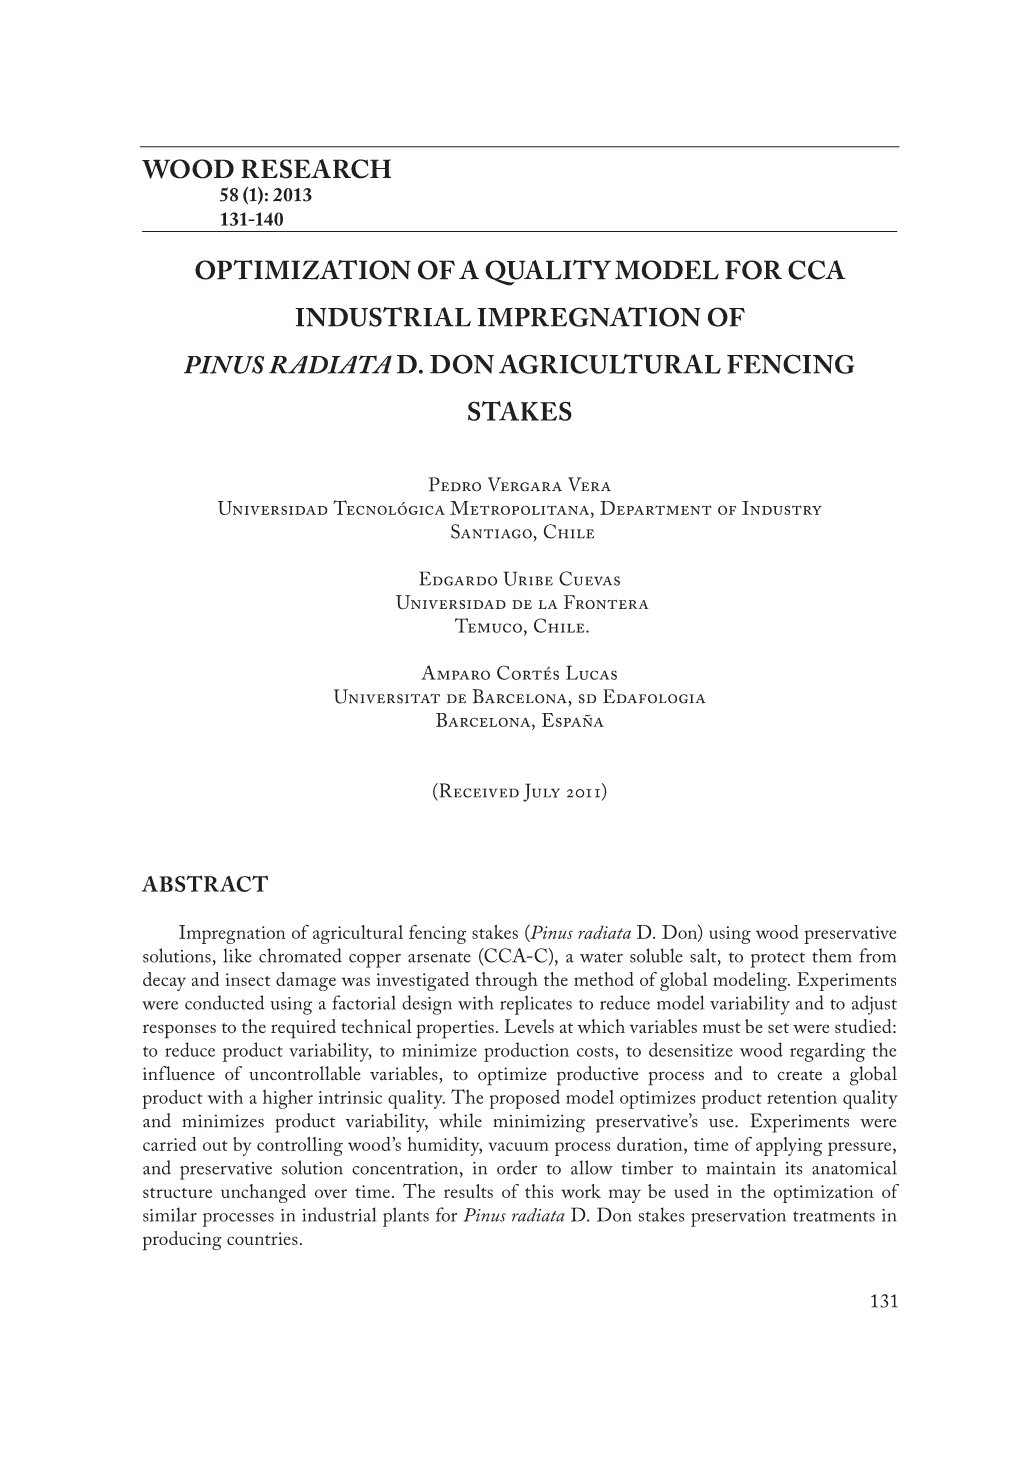 Wood Research Optimization of a Quality Model for Cca Industrial Impregnation of Pinus Radiata D. Don Agricultural Fencing Stak